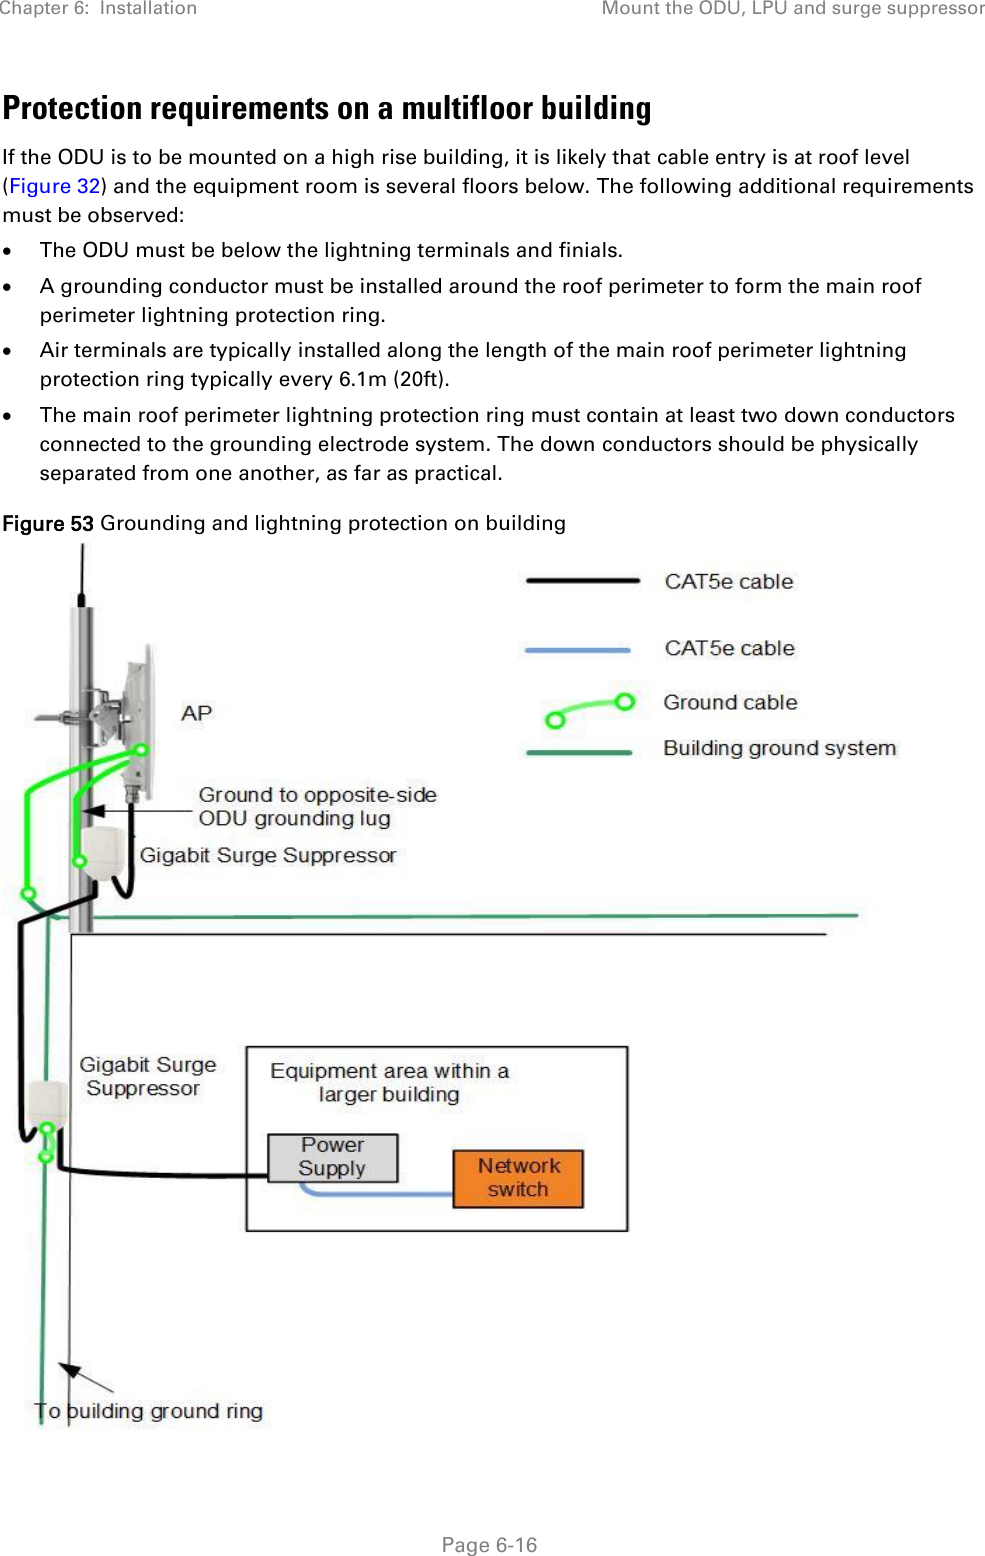 Chapter 6:  Installation Mount the ODU, LPU and surge suppressor   Page 6-16 Protection requirements on a multifloor building If the ODU is to be mounted on a high rise building, it is likely that cable entry is at roof level (Figure 32) and the equipment room is several floors below. The following additional requirements must be observed:  The ODU must be below the lightning terminals and finials.  A grounding conductor must be installed around the roof perimeter to form the main roof perimeter lightning protection ring.  Air terminals are typically installed along the length of the main roof perimeter lightning protection ring typically every 6.1m (20ft).  The main roof perimeter lightning protection ring must contain at least two down conductors connected to the grounding electrode system. The down conductors should be physically separated from one another, as far as practical. Figure 53 Grounding and lightning protection on building  